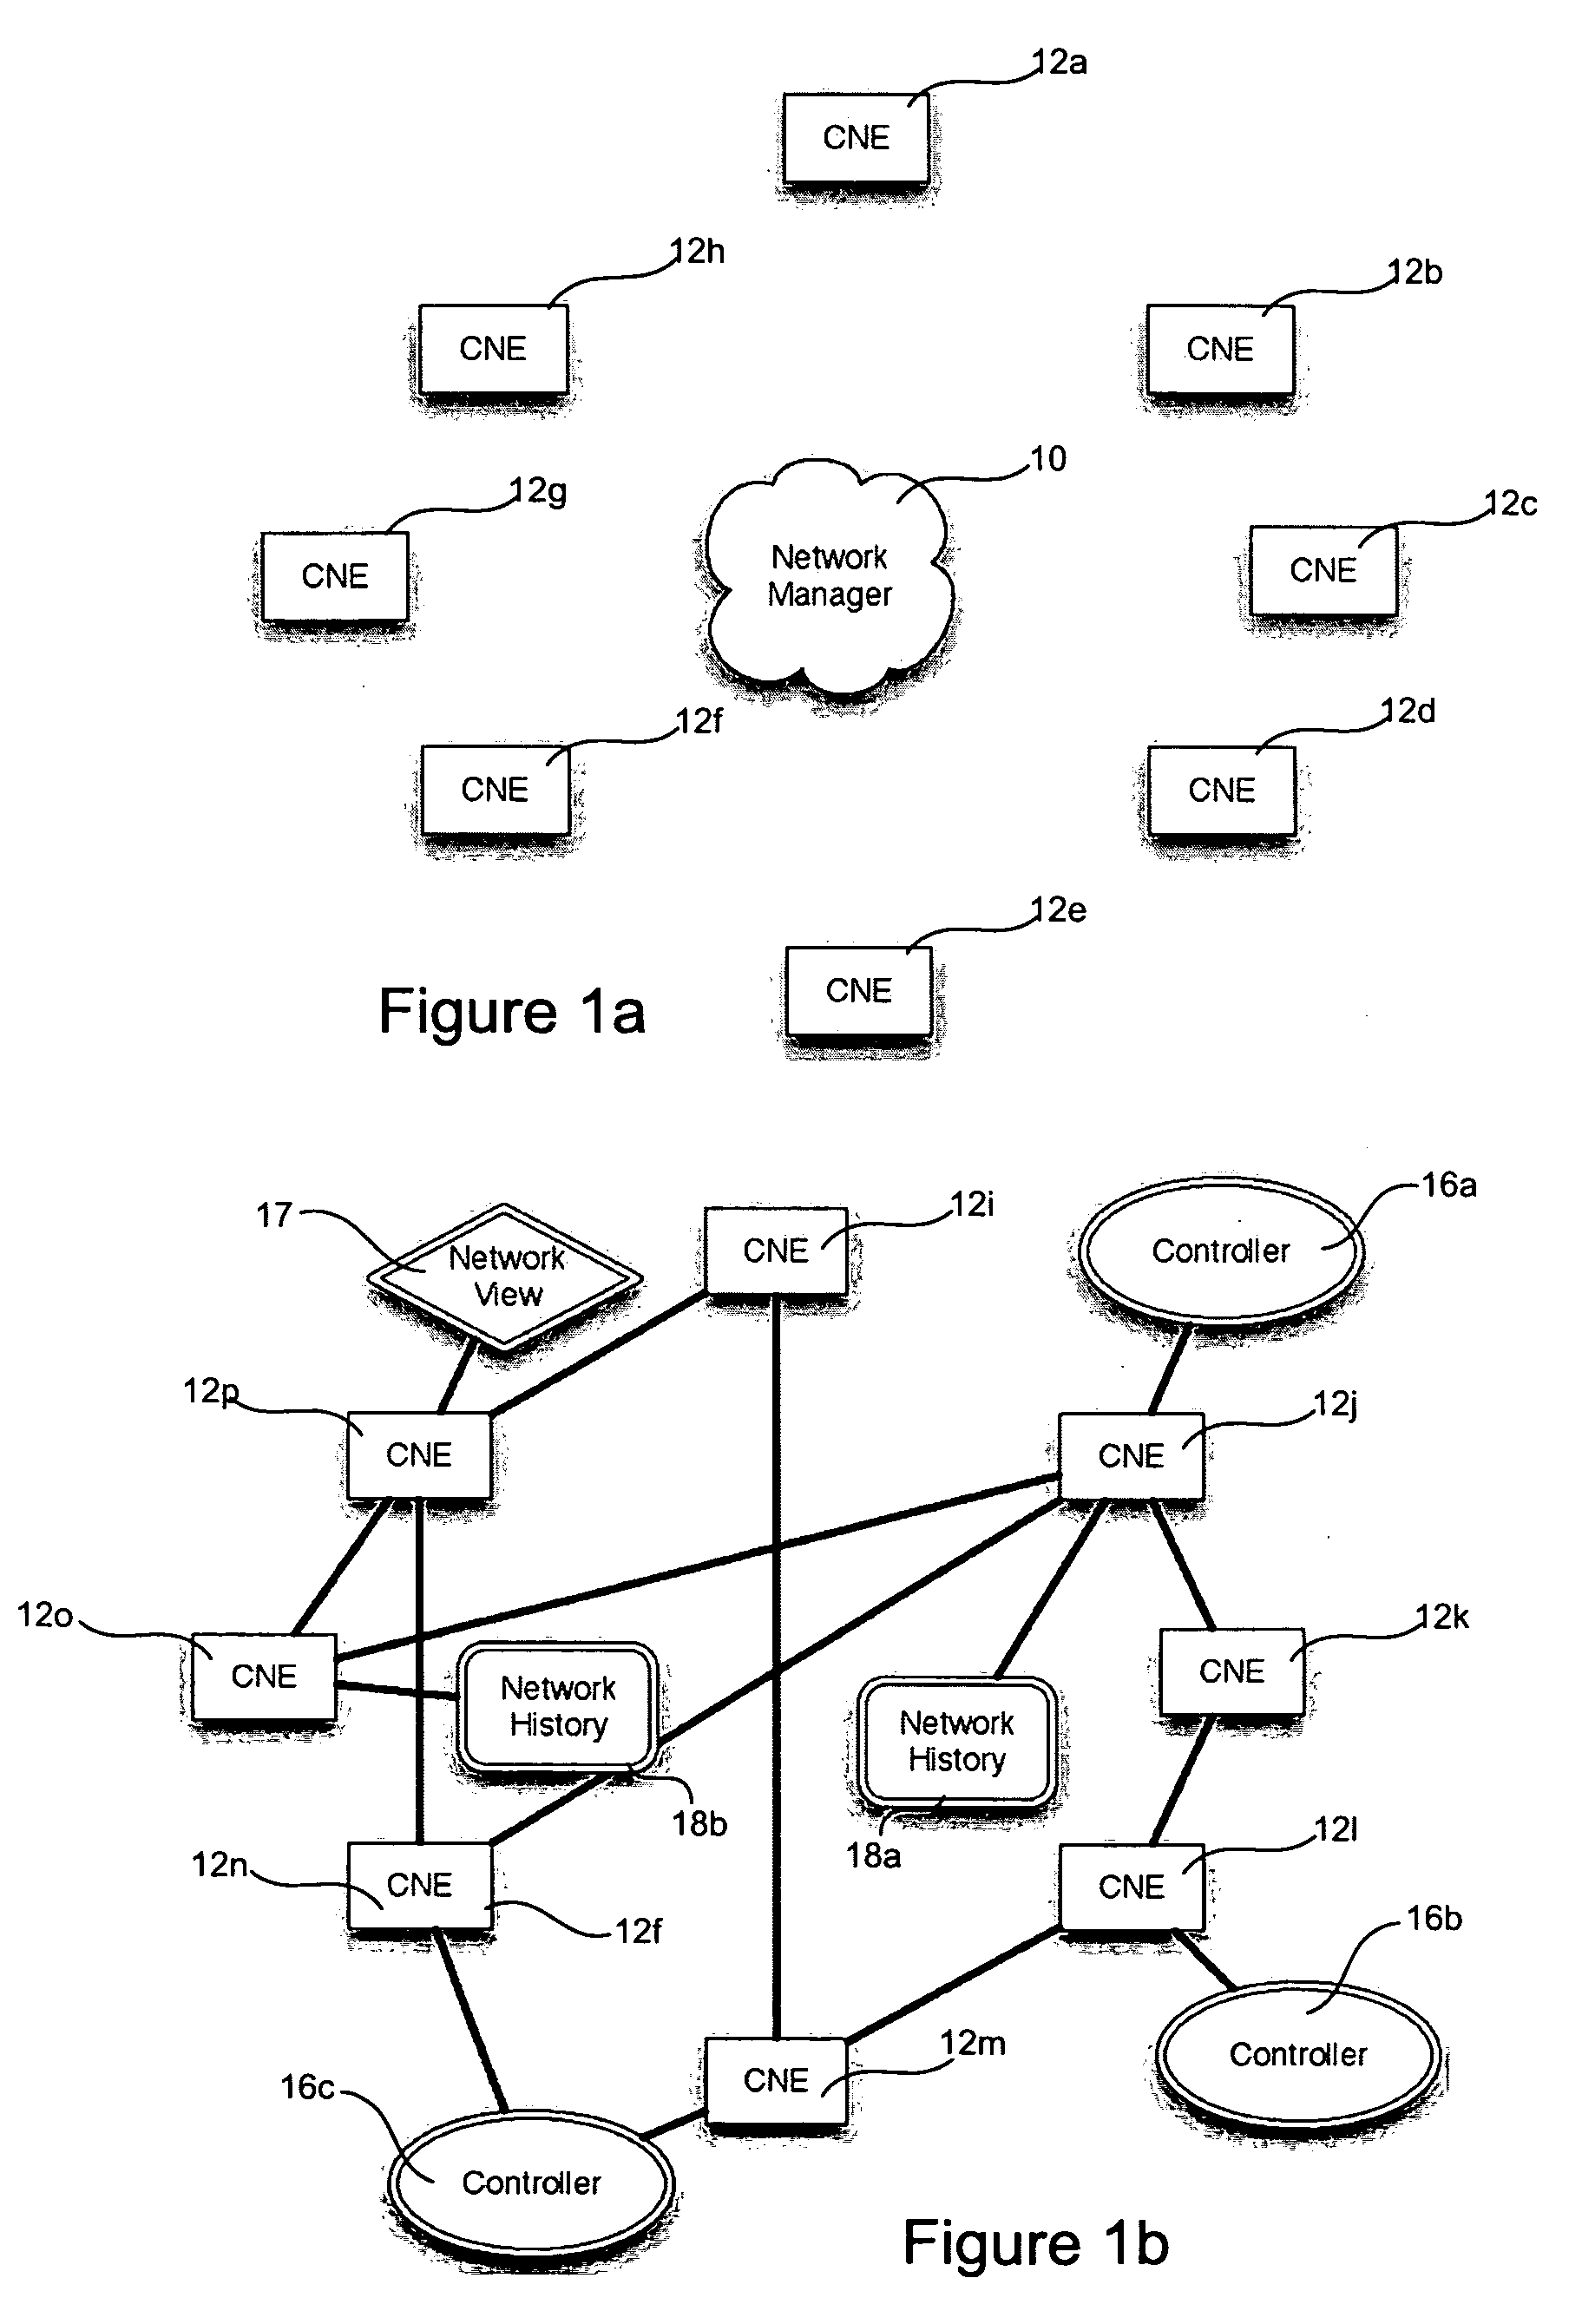 Network operating system for managing and securing networks